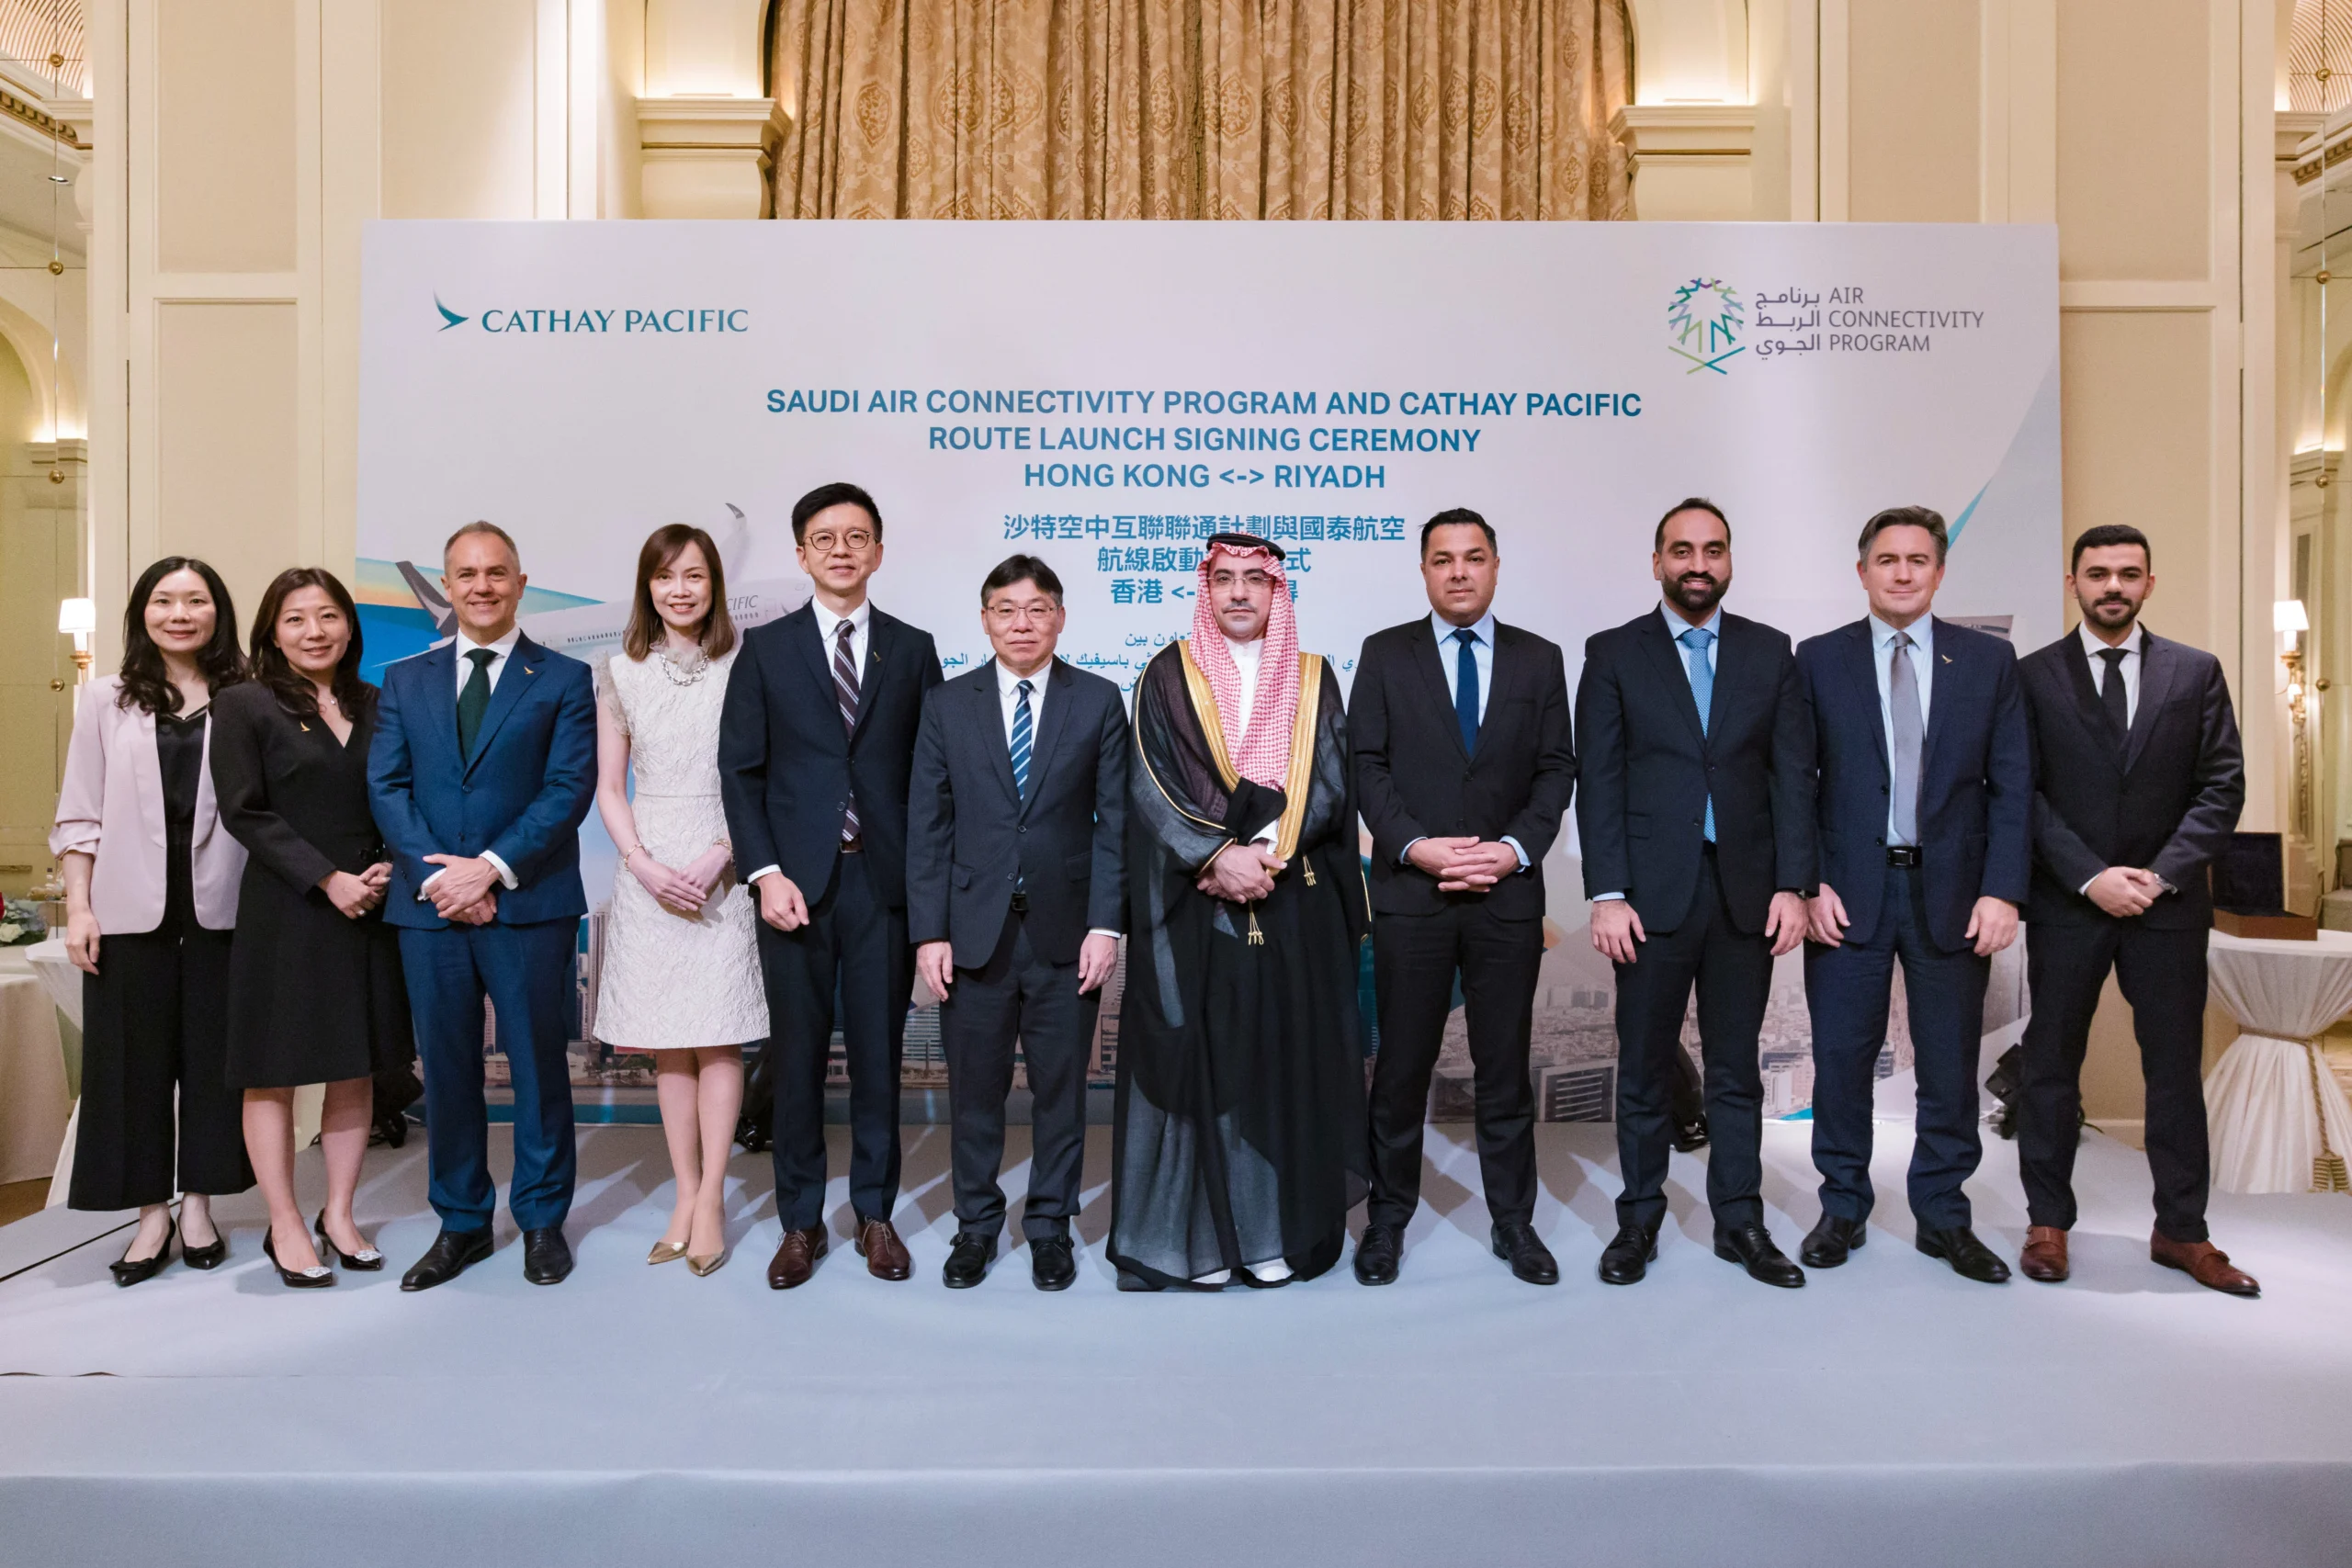 Cathay Pacific today (June 6) announces the launch of direct passenger flights to Riyadh, the capital and financial center of Saudi Arabia, starting on 28 October 2024.